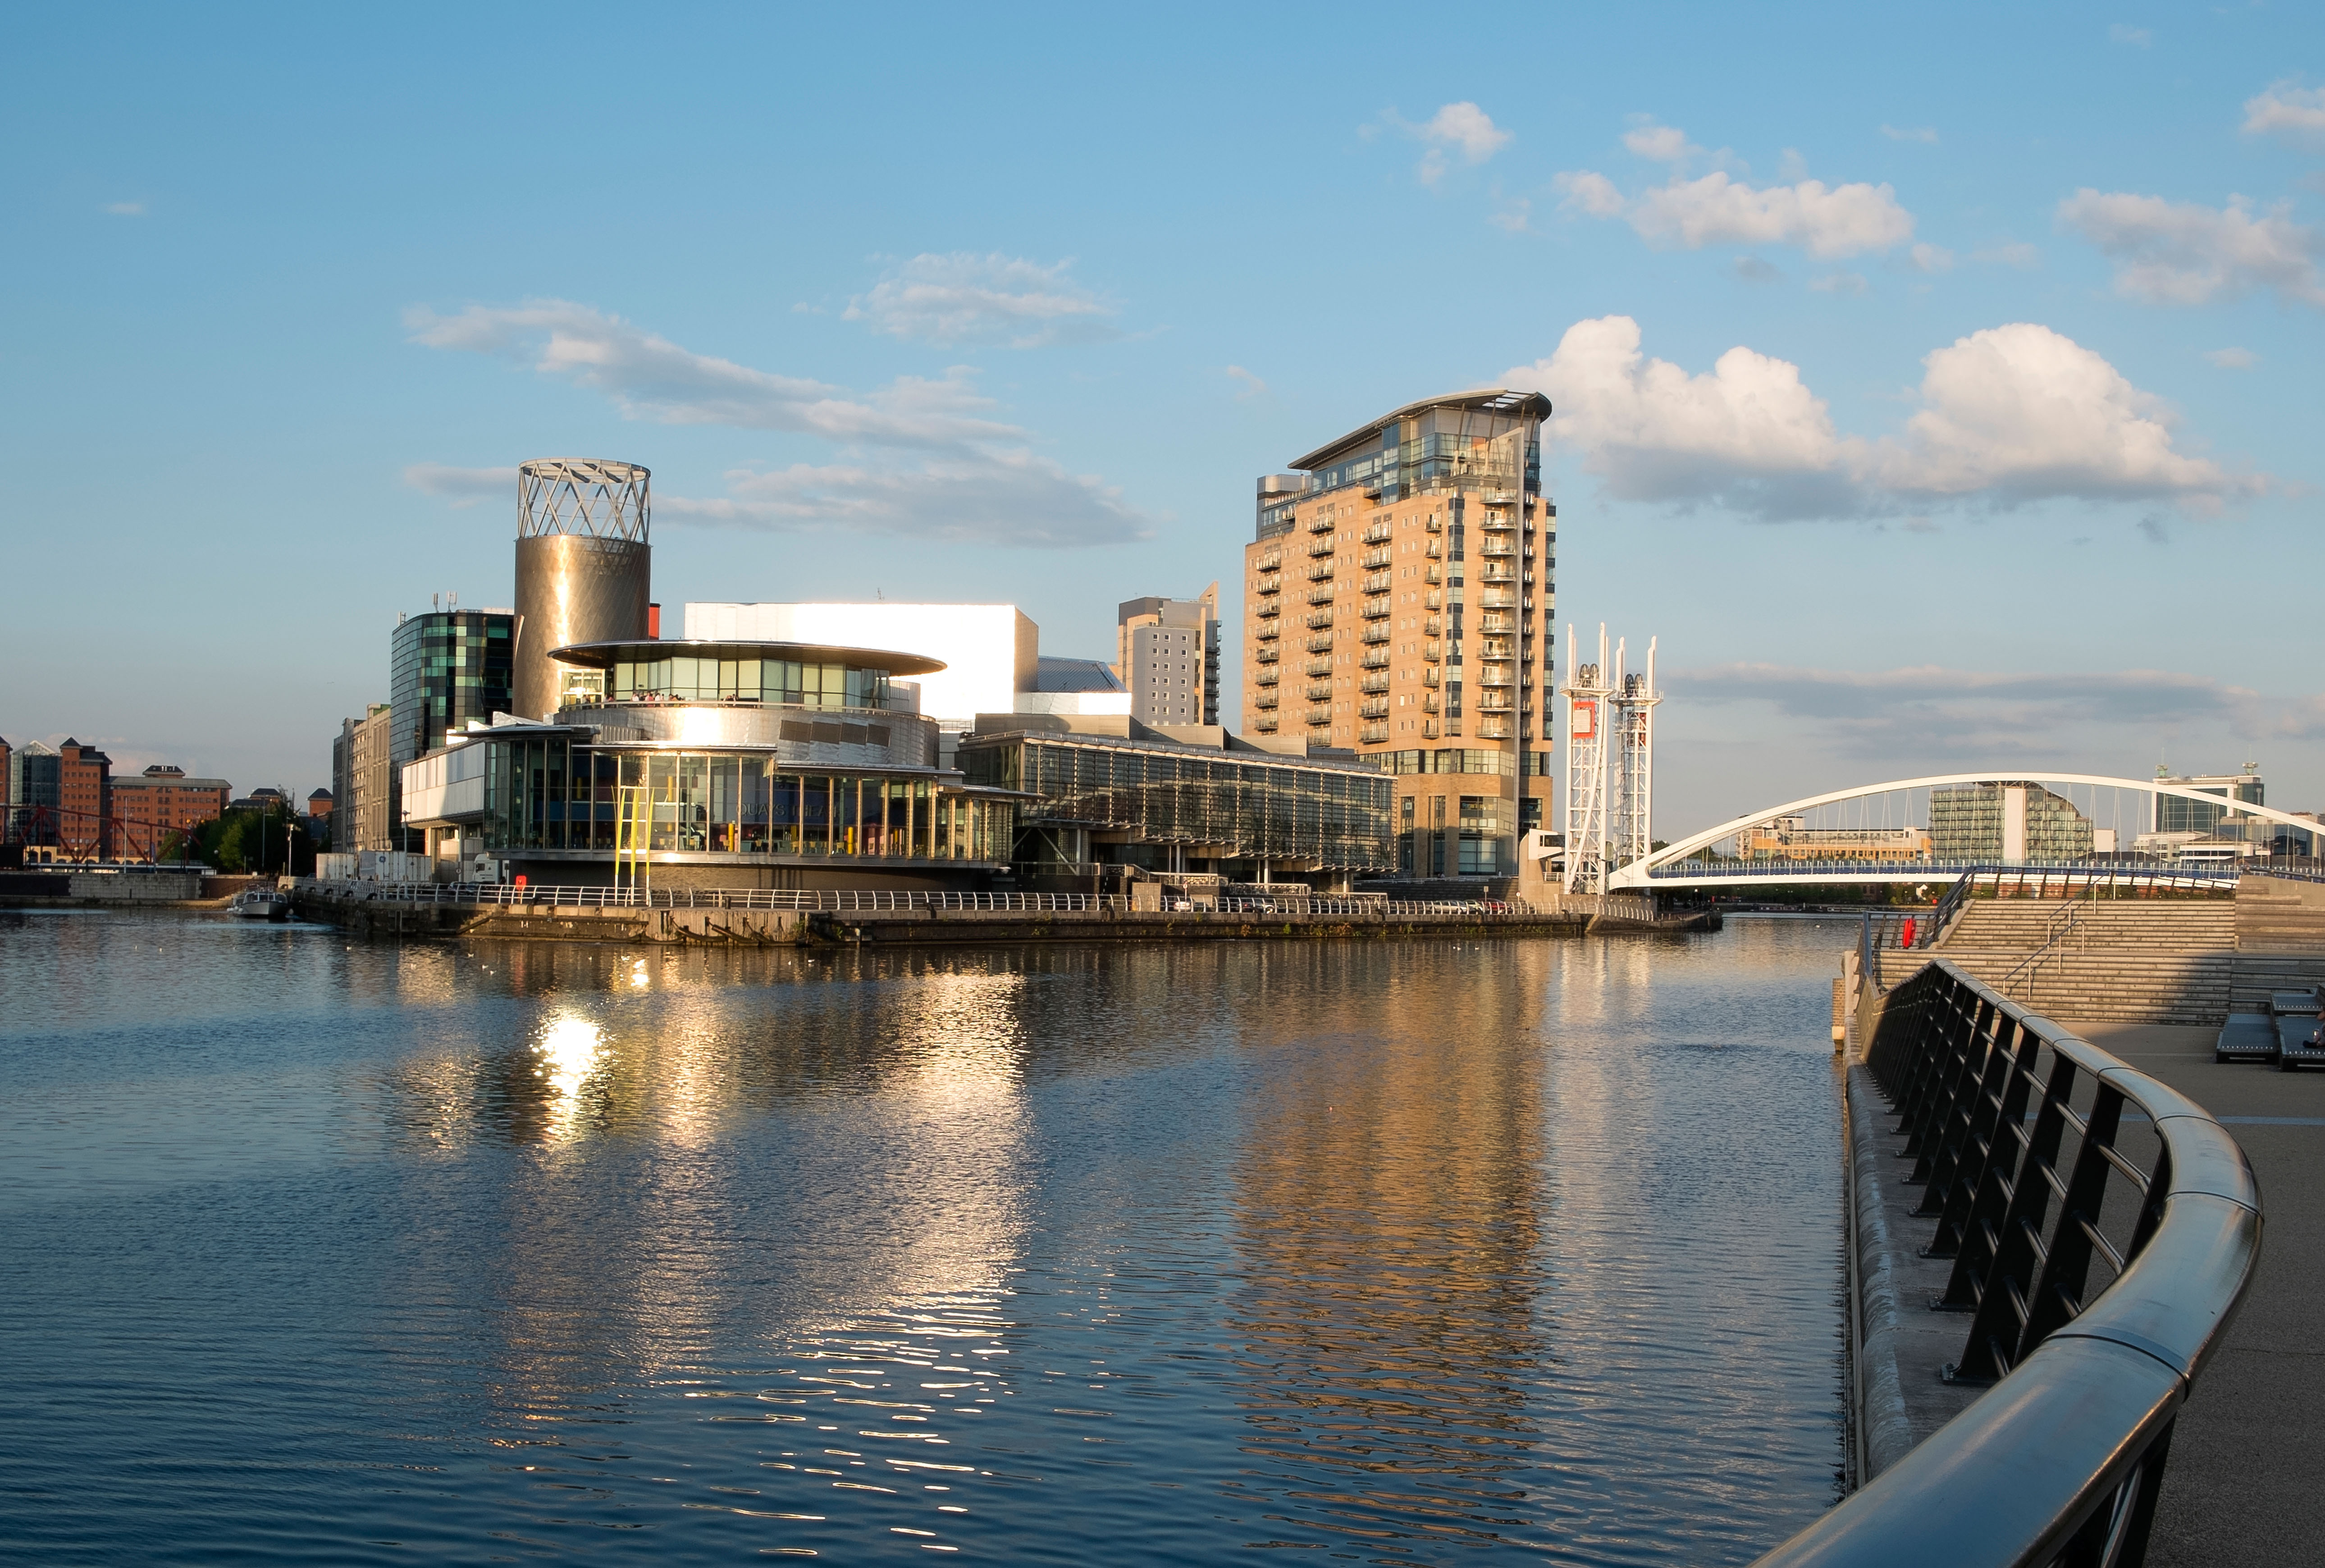 England, Greater Manchester, Salford Quays, Lowry Theatre and Lowry Bridge